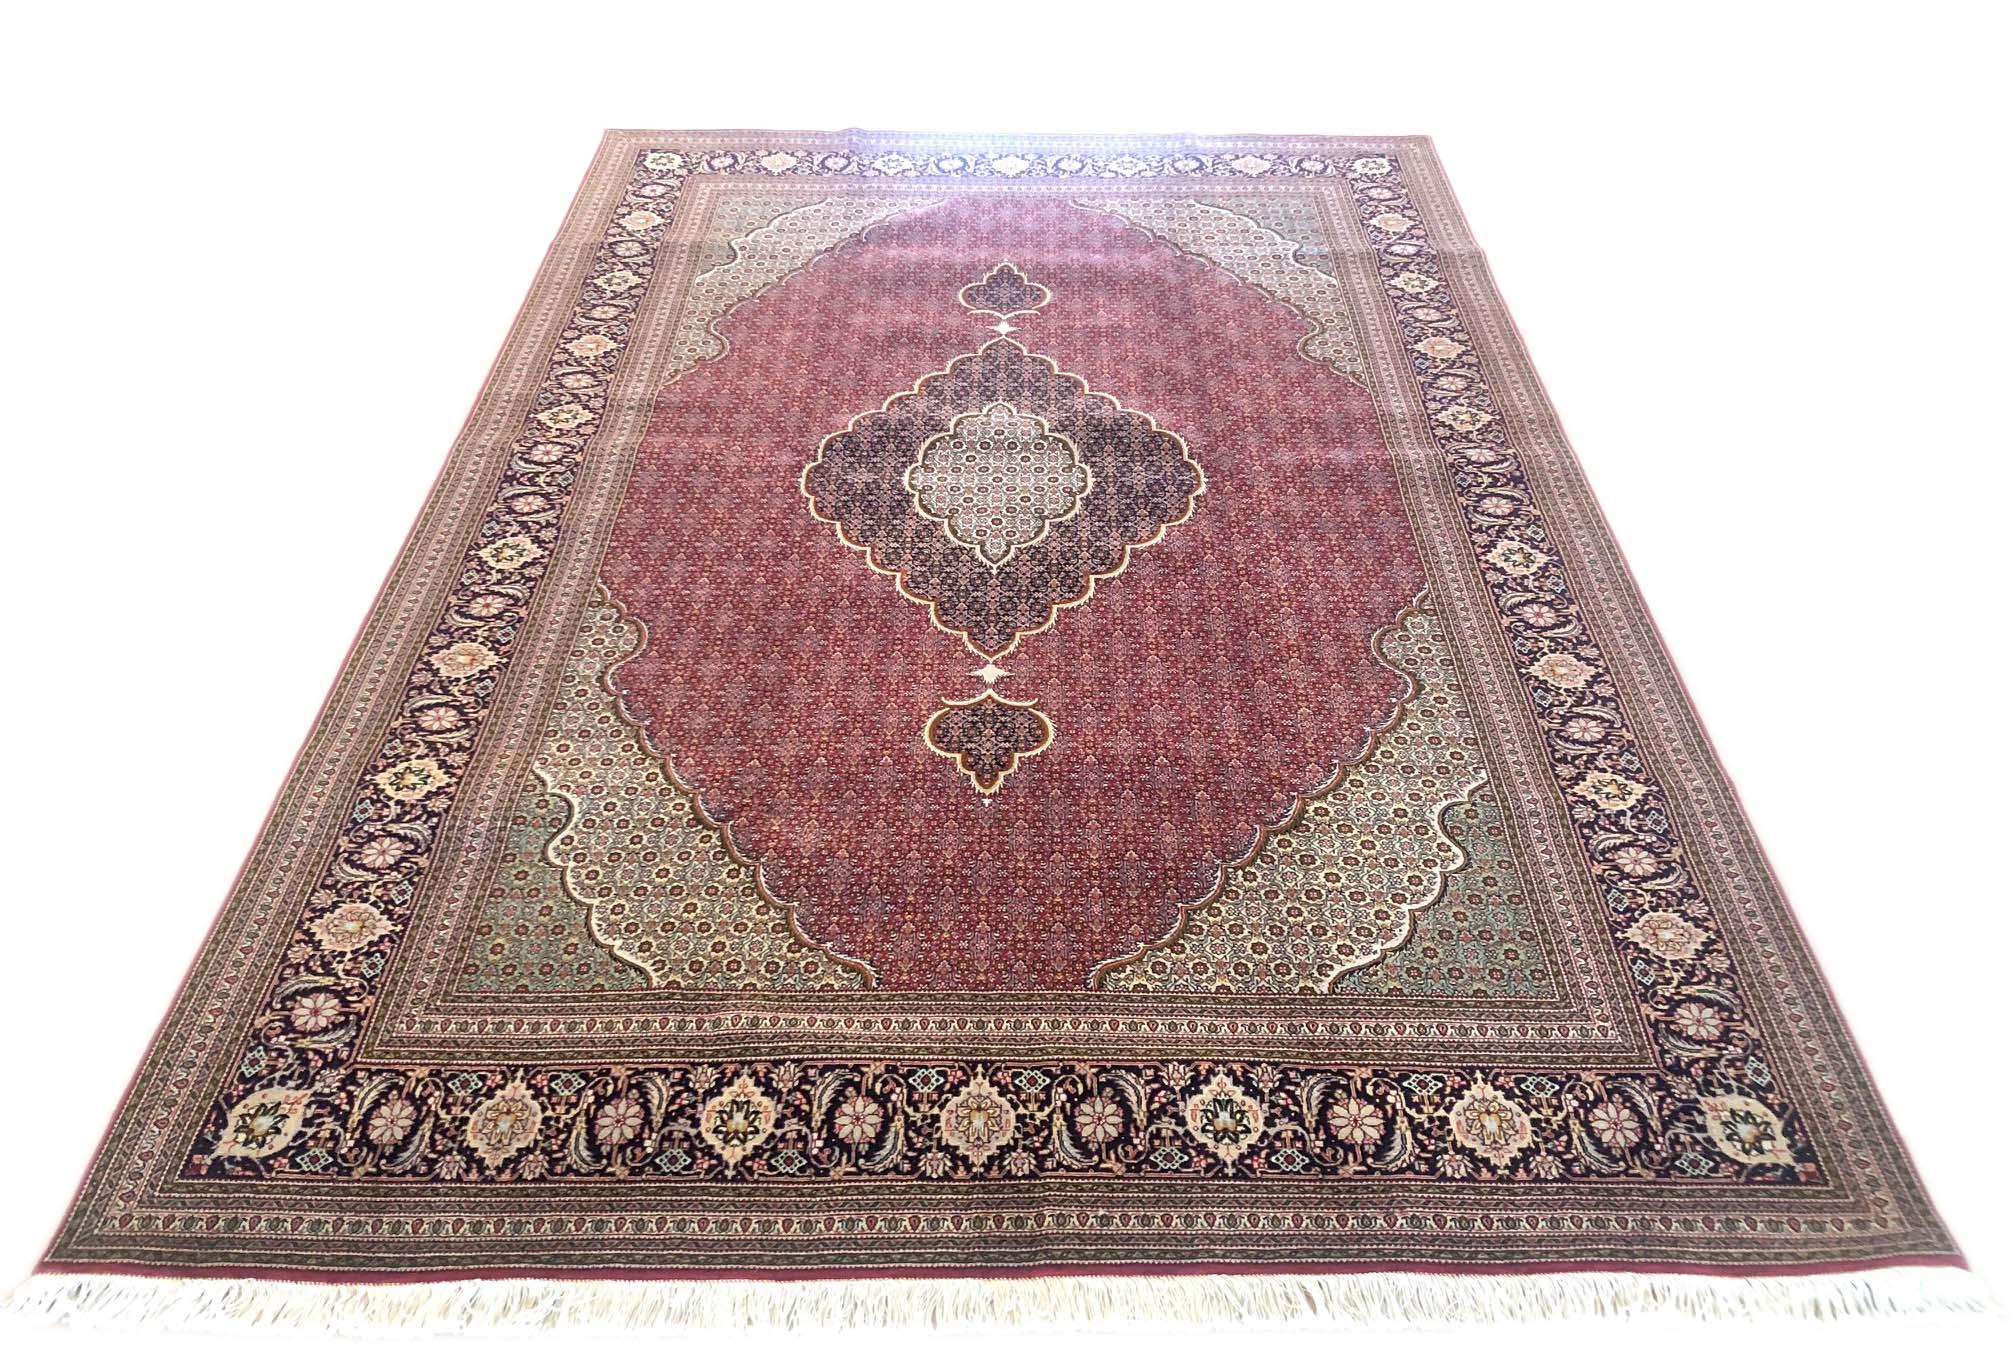 Hand-Knotted Authentic Persian Hand Knotted Medallion Fish Design (Mahi) Tabriz Rug 